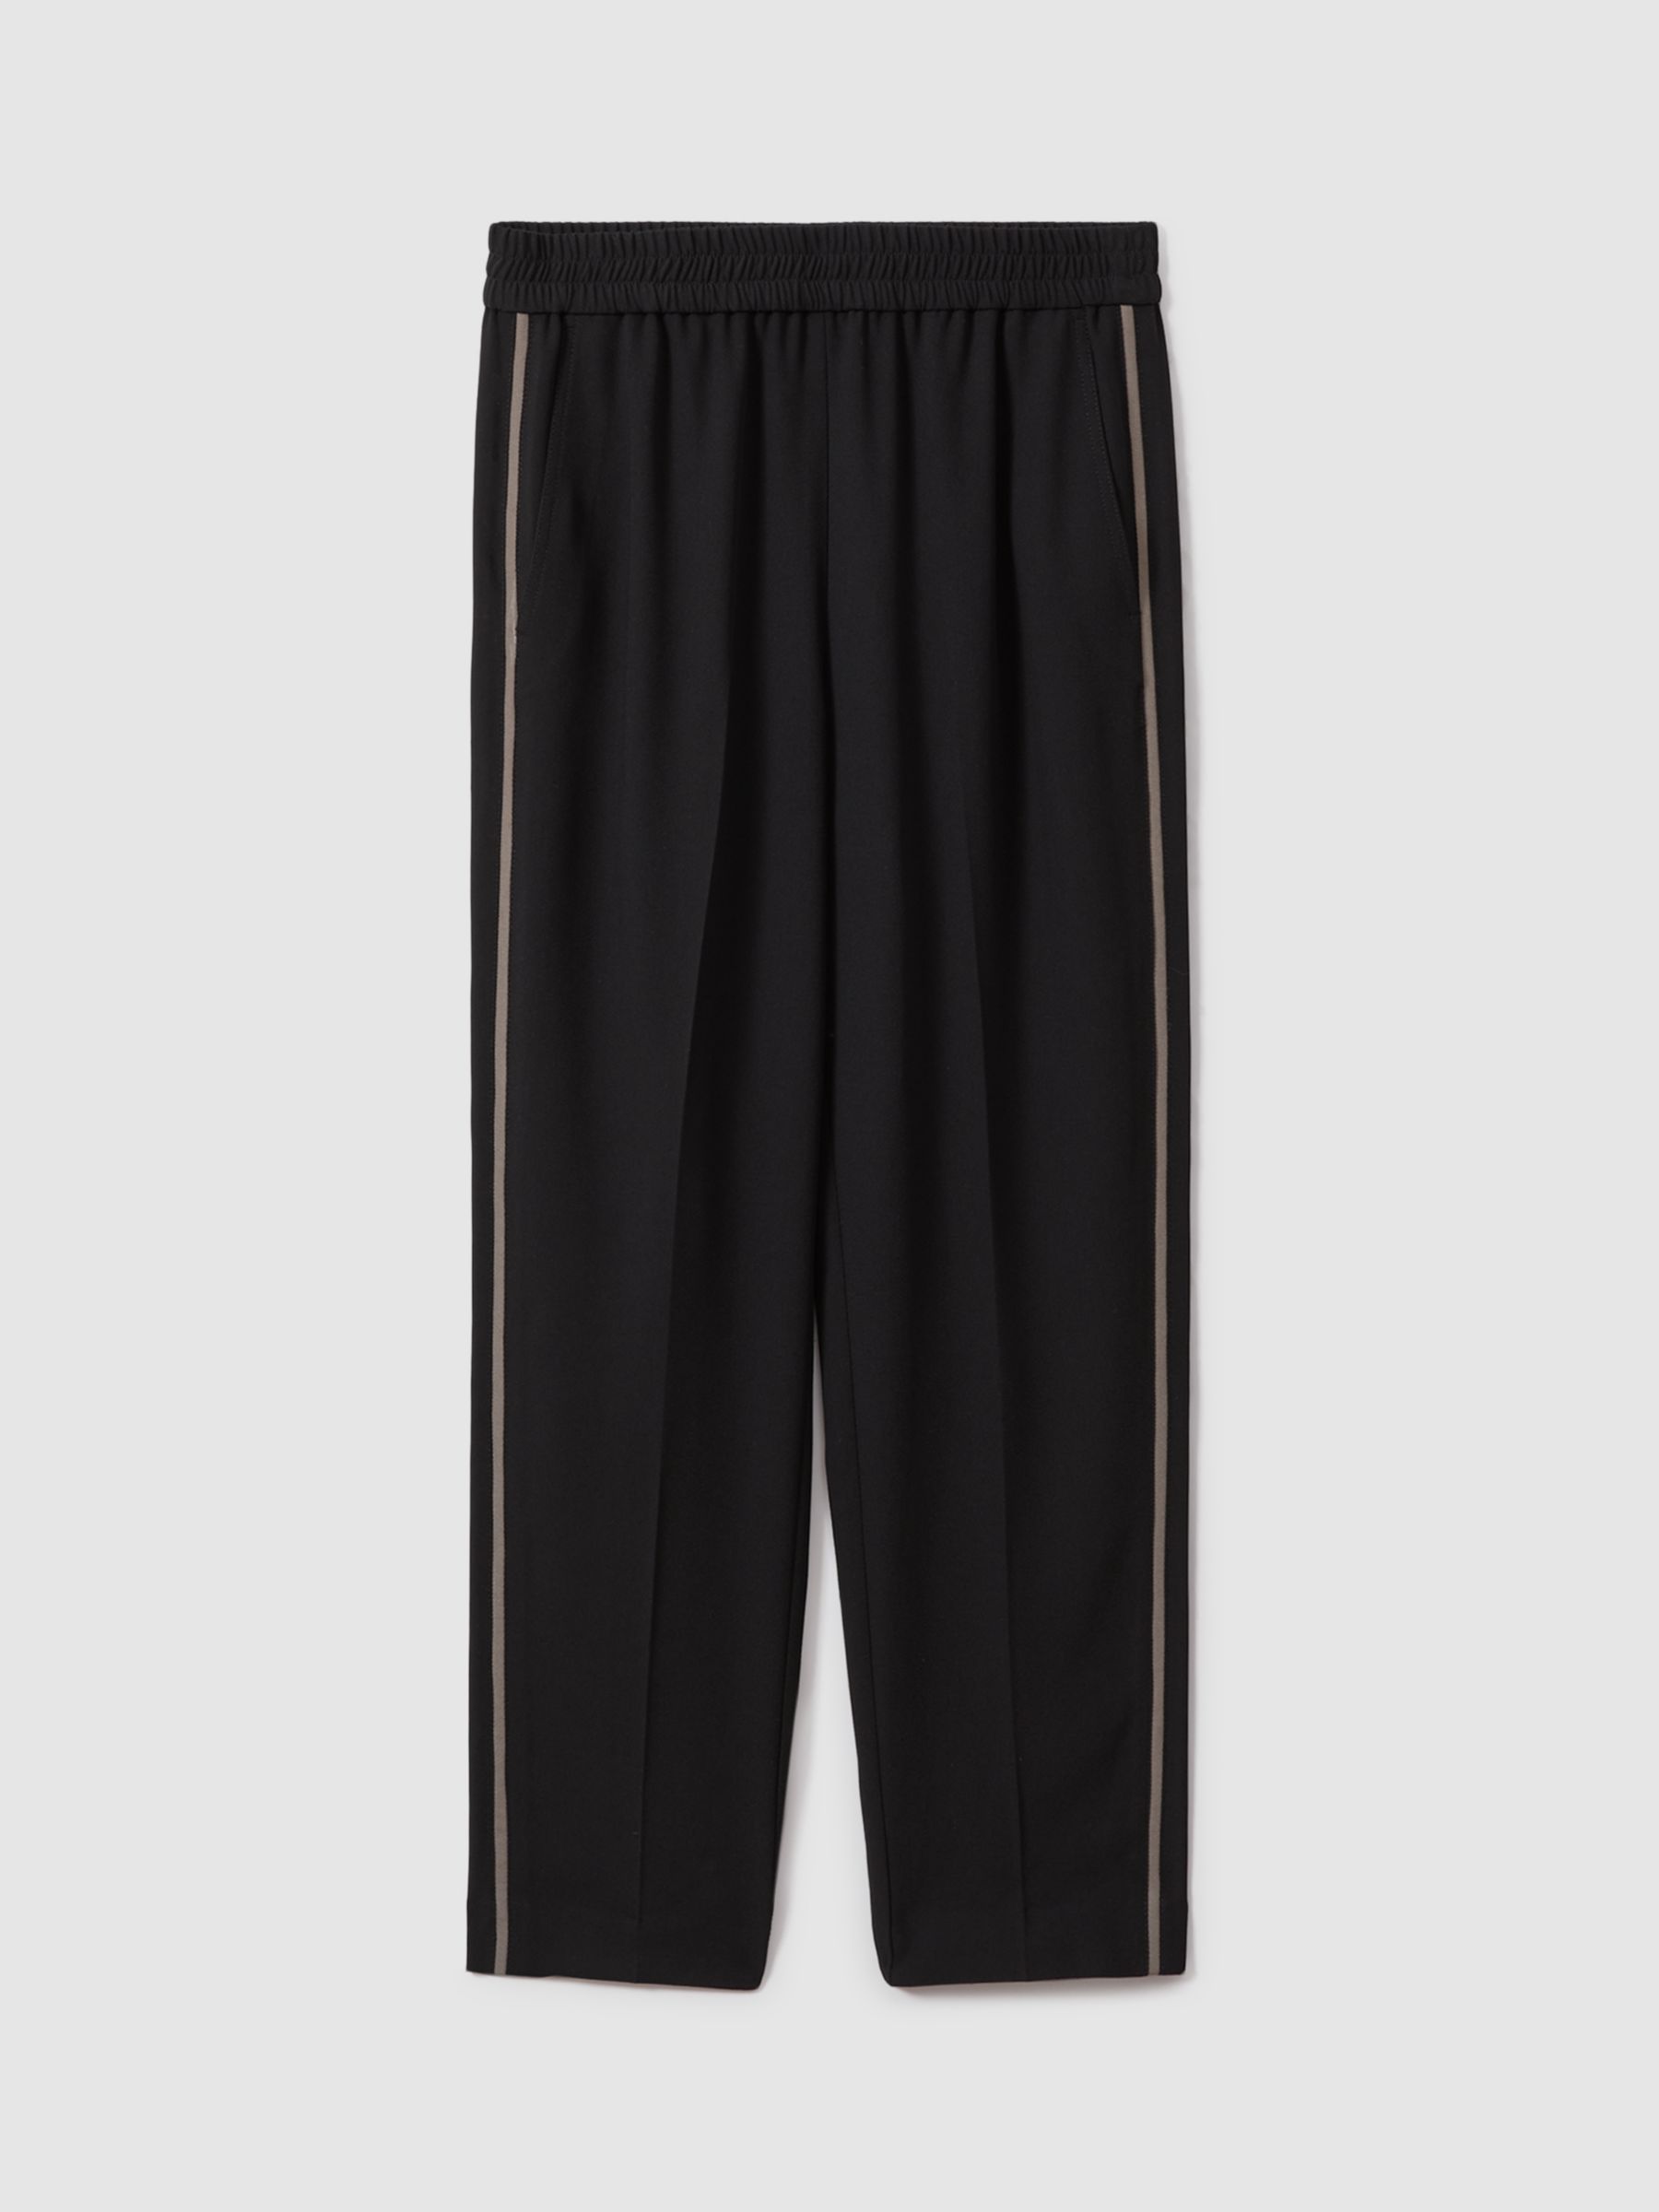 Buy Reiss Remi Side Stripe Tapered Trousers, Black Online at johnlewis.com